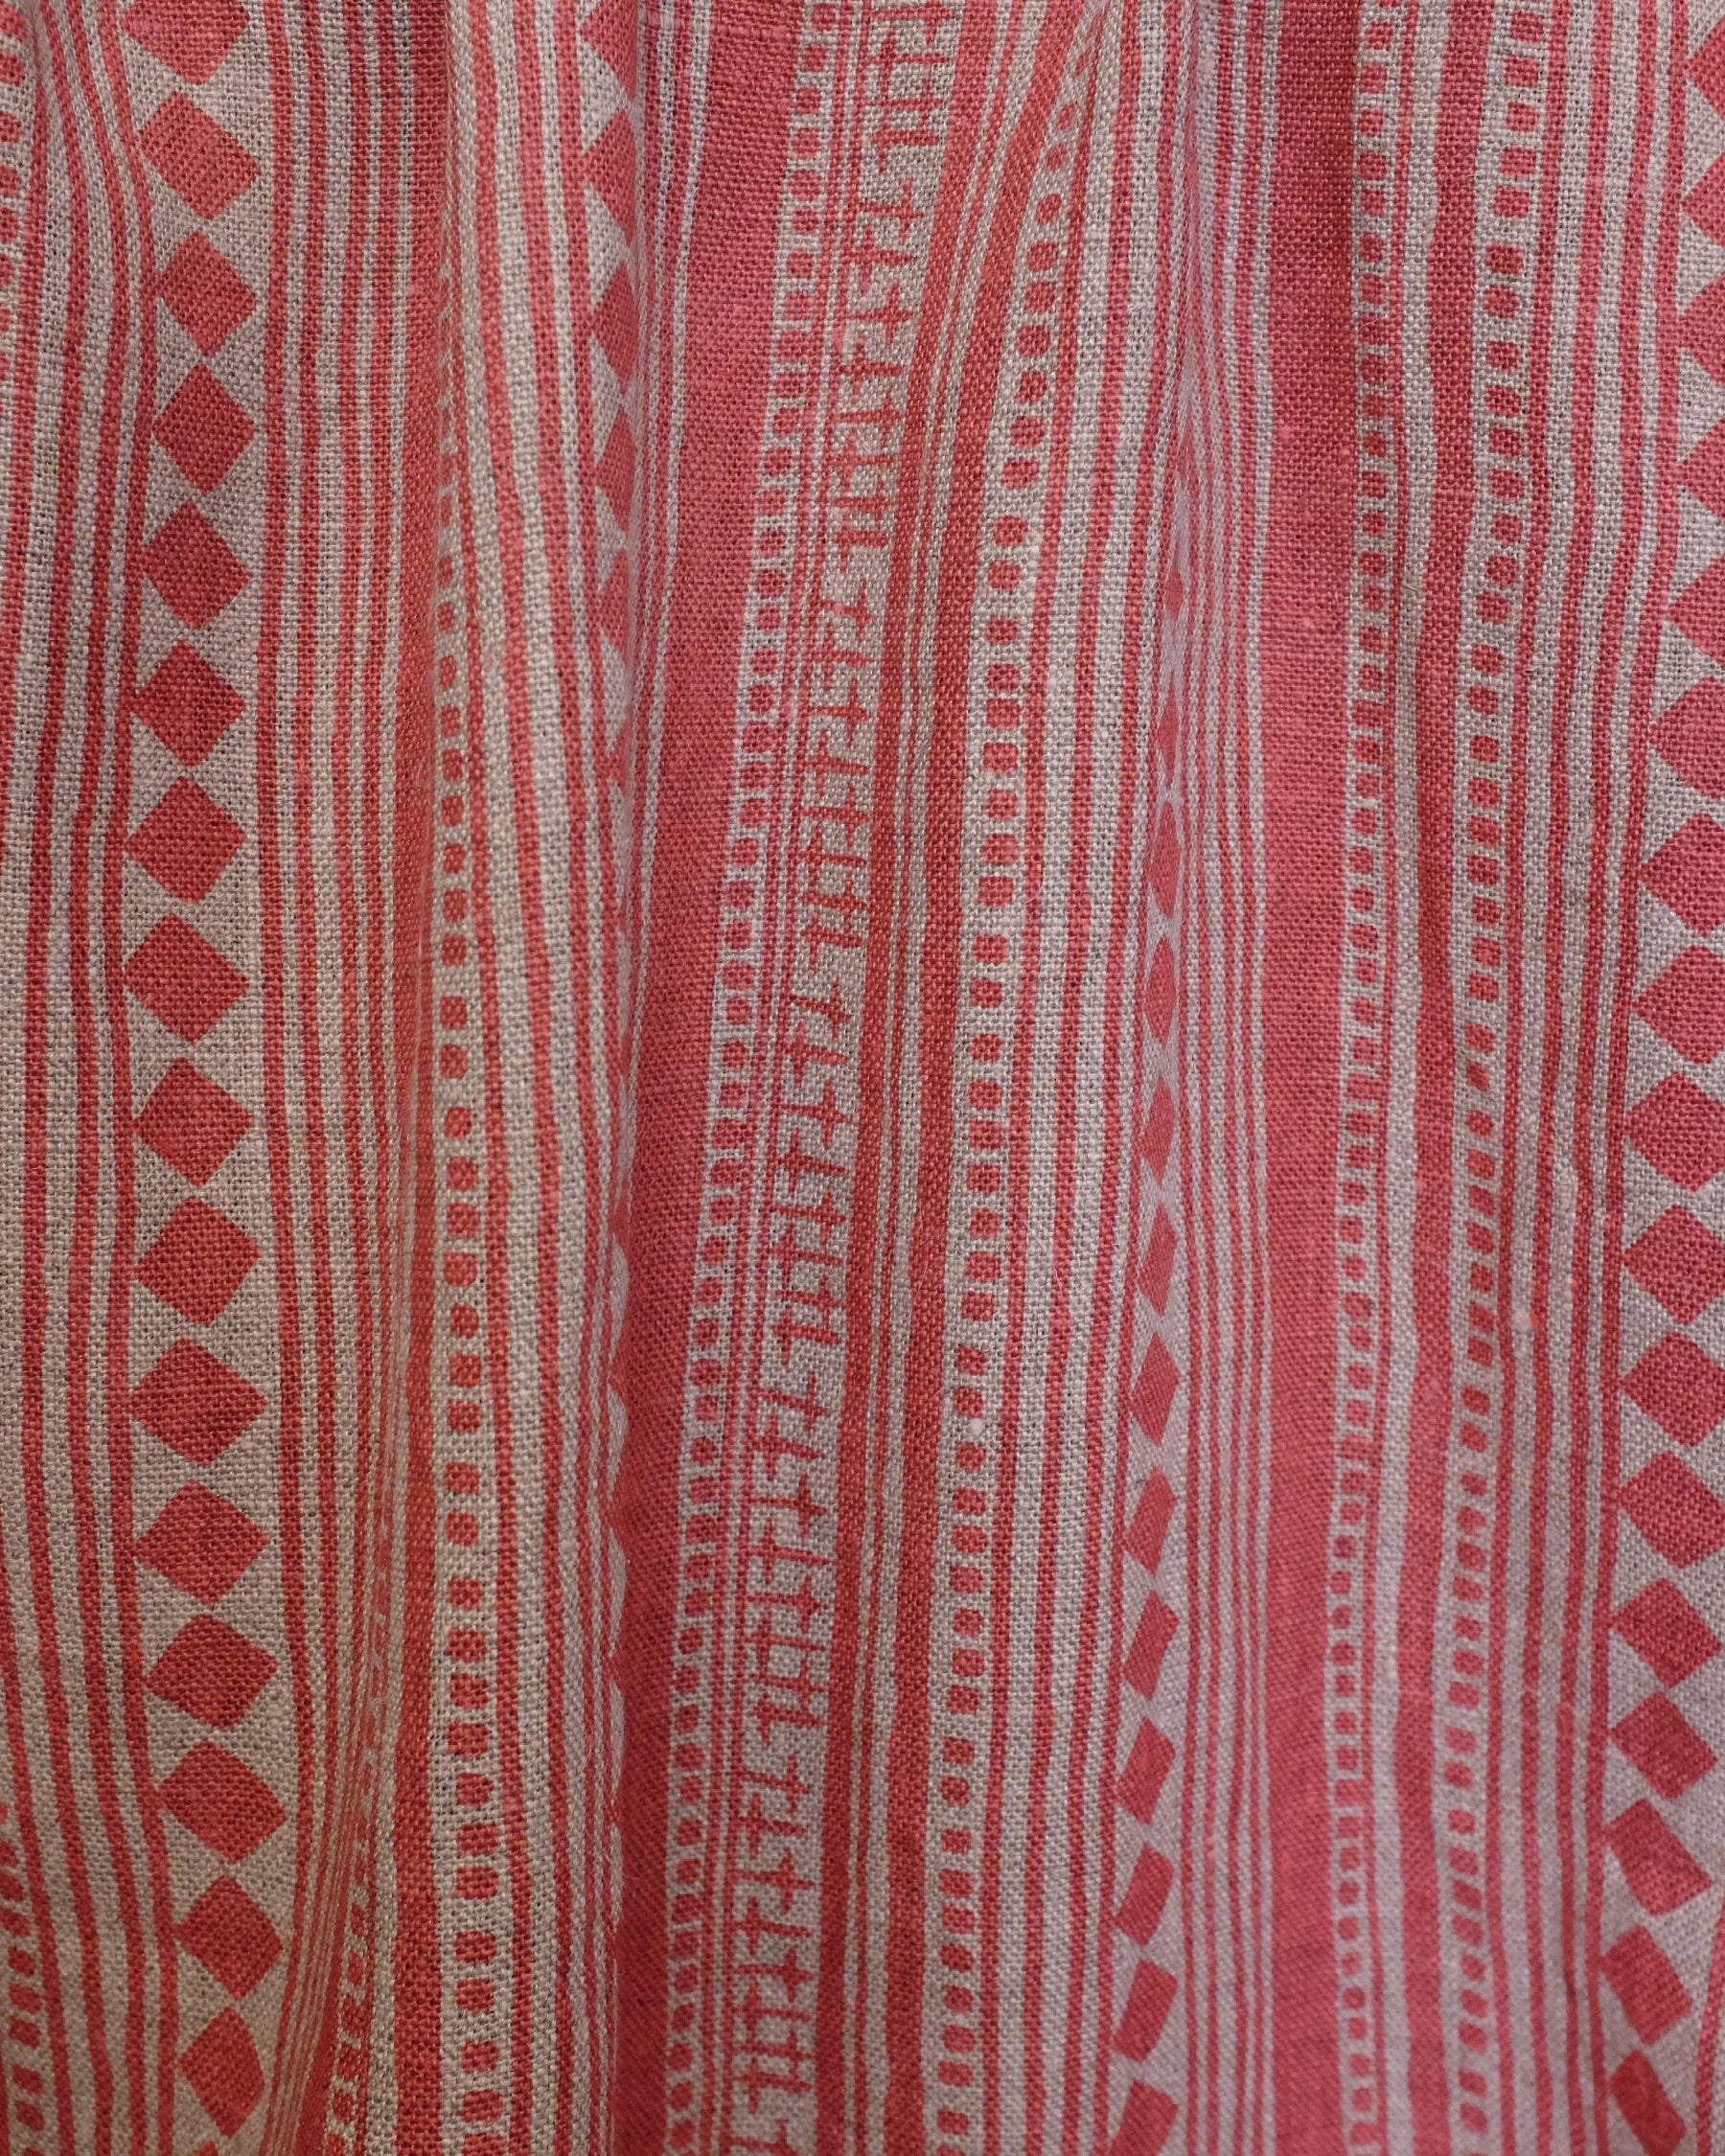 Fabric - Linen - Cabaret Stripe in Rose £32 p/m-Humphries and Begg